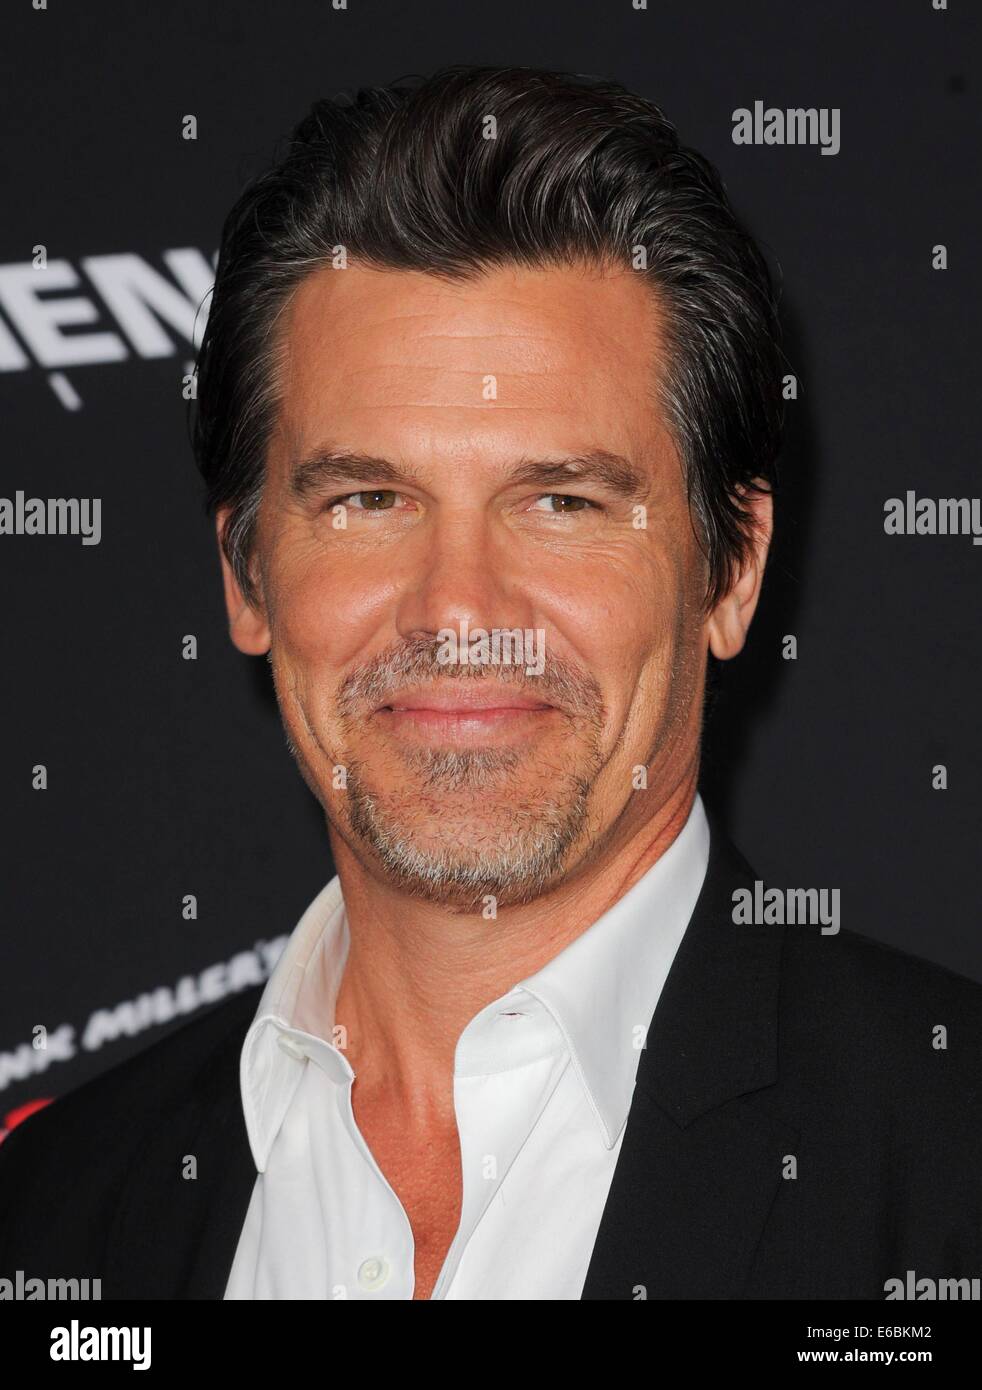 Los Angeles, CA, USA. 19th Aug, 2014. Josh Brolin at arrivals for SIN CITY: A DAME TO KILL FOR Premiere, TCL Chinese 6 Theatres (formerly Grauman's), Los Angeles, CA August 19, 2014. Credit:  Elizabeth Goodenough/Everett Collection/Alamy Live News Stock Photo